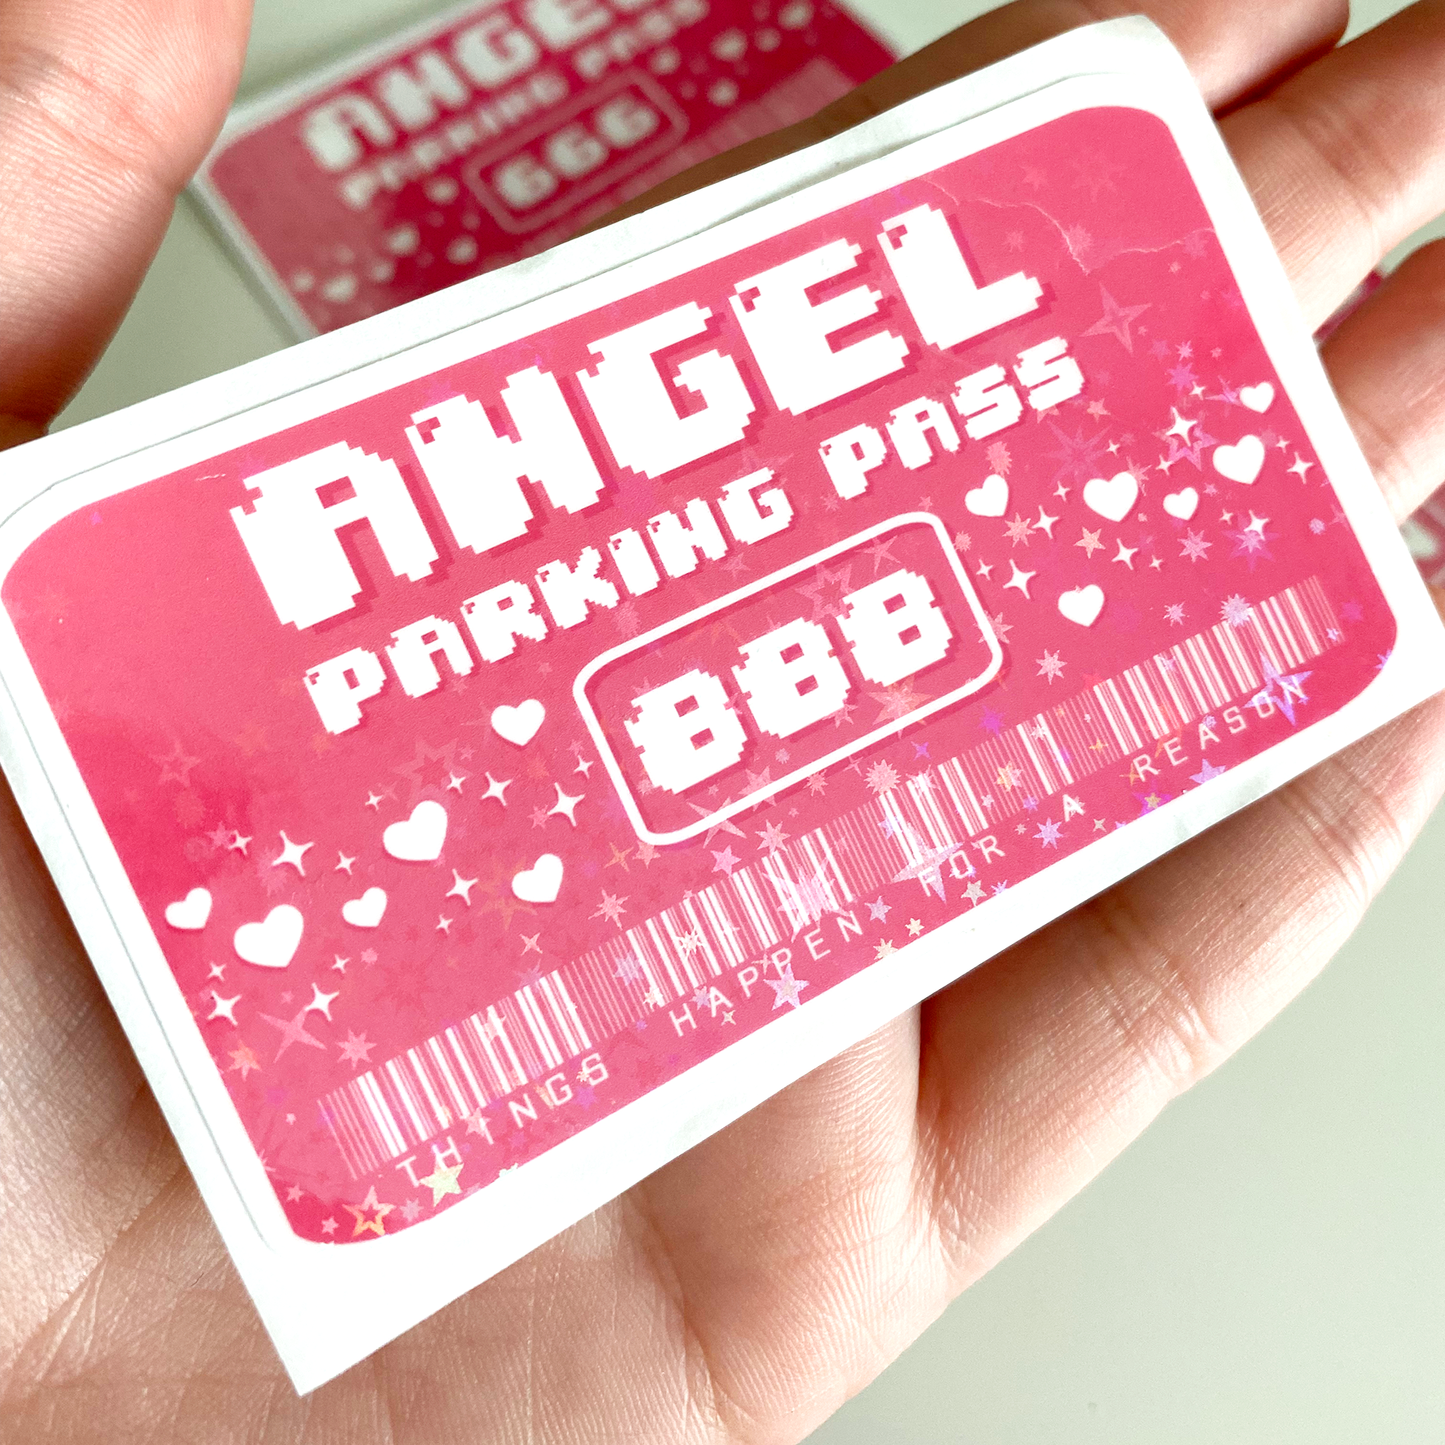 Holographic Angel Parking Pass Sticker